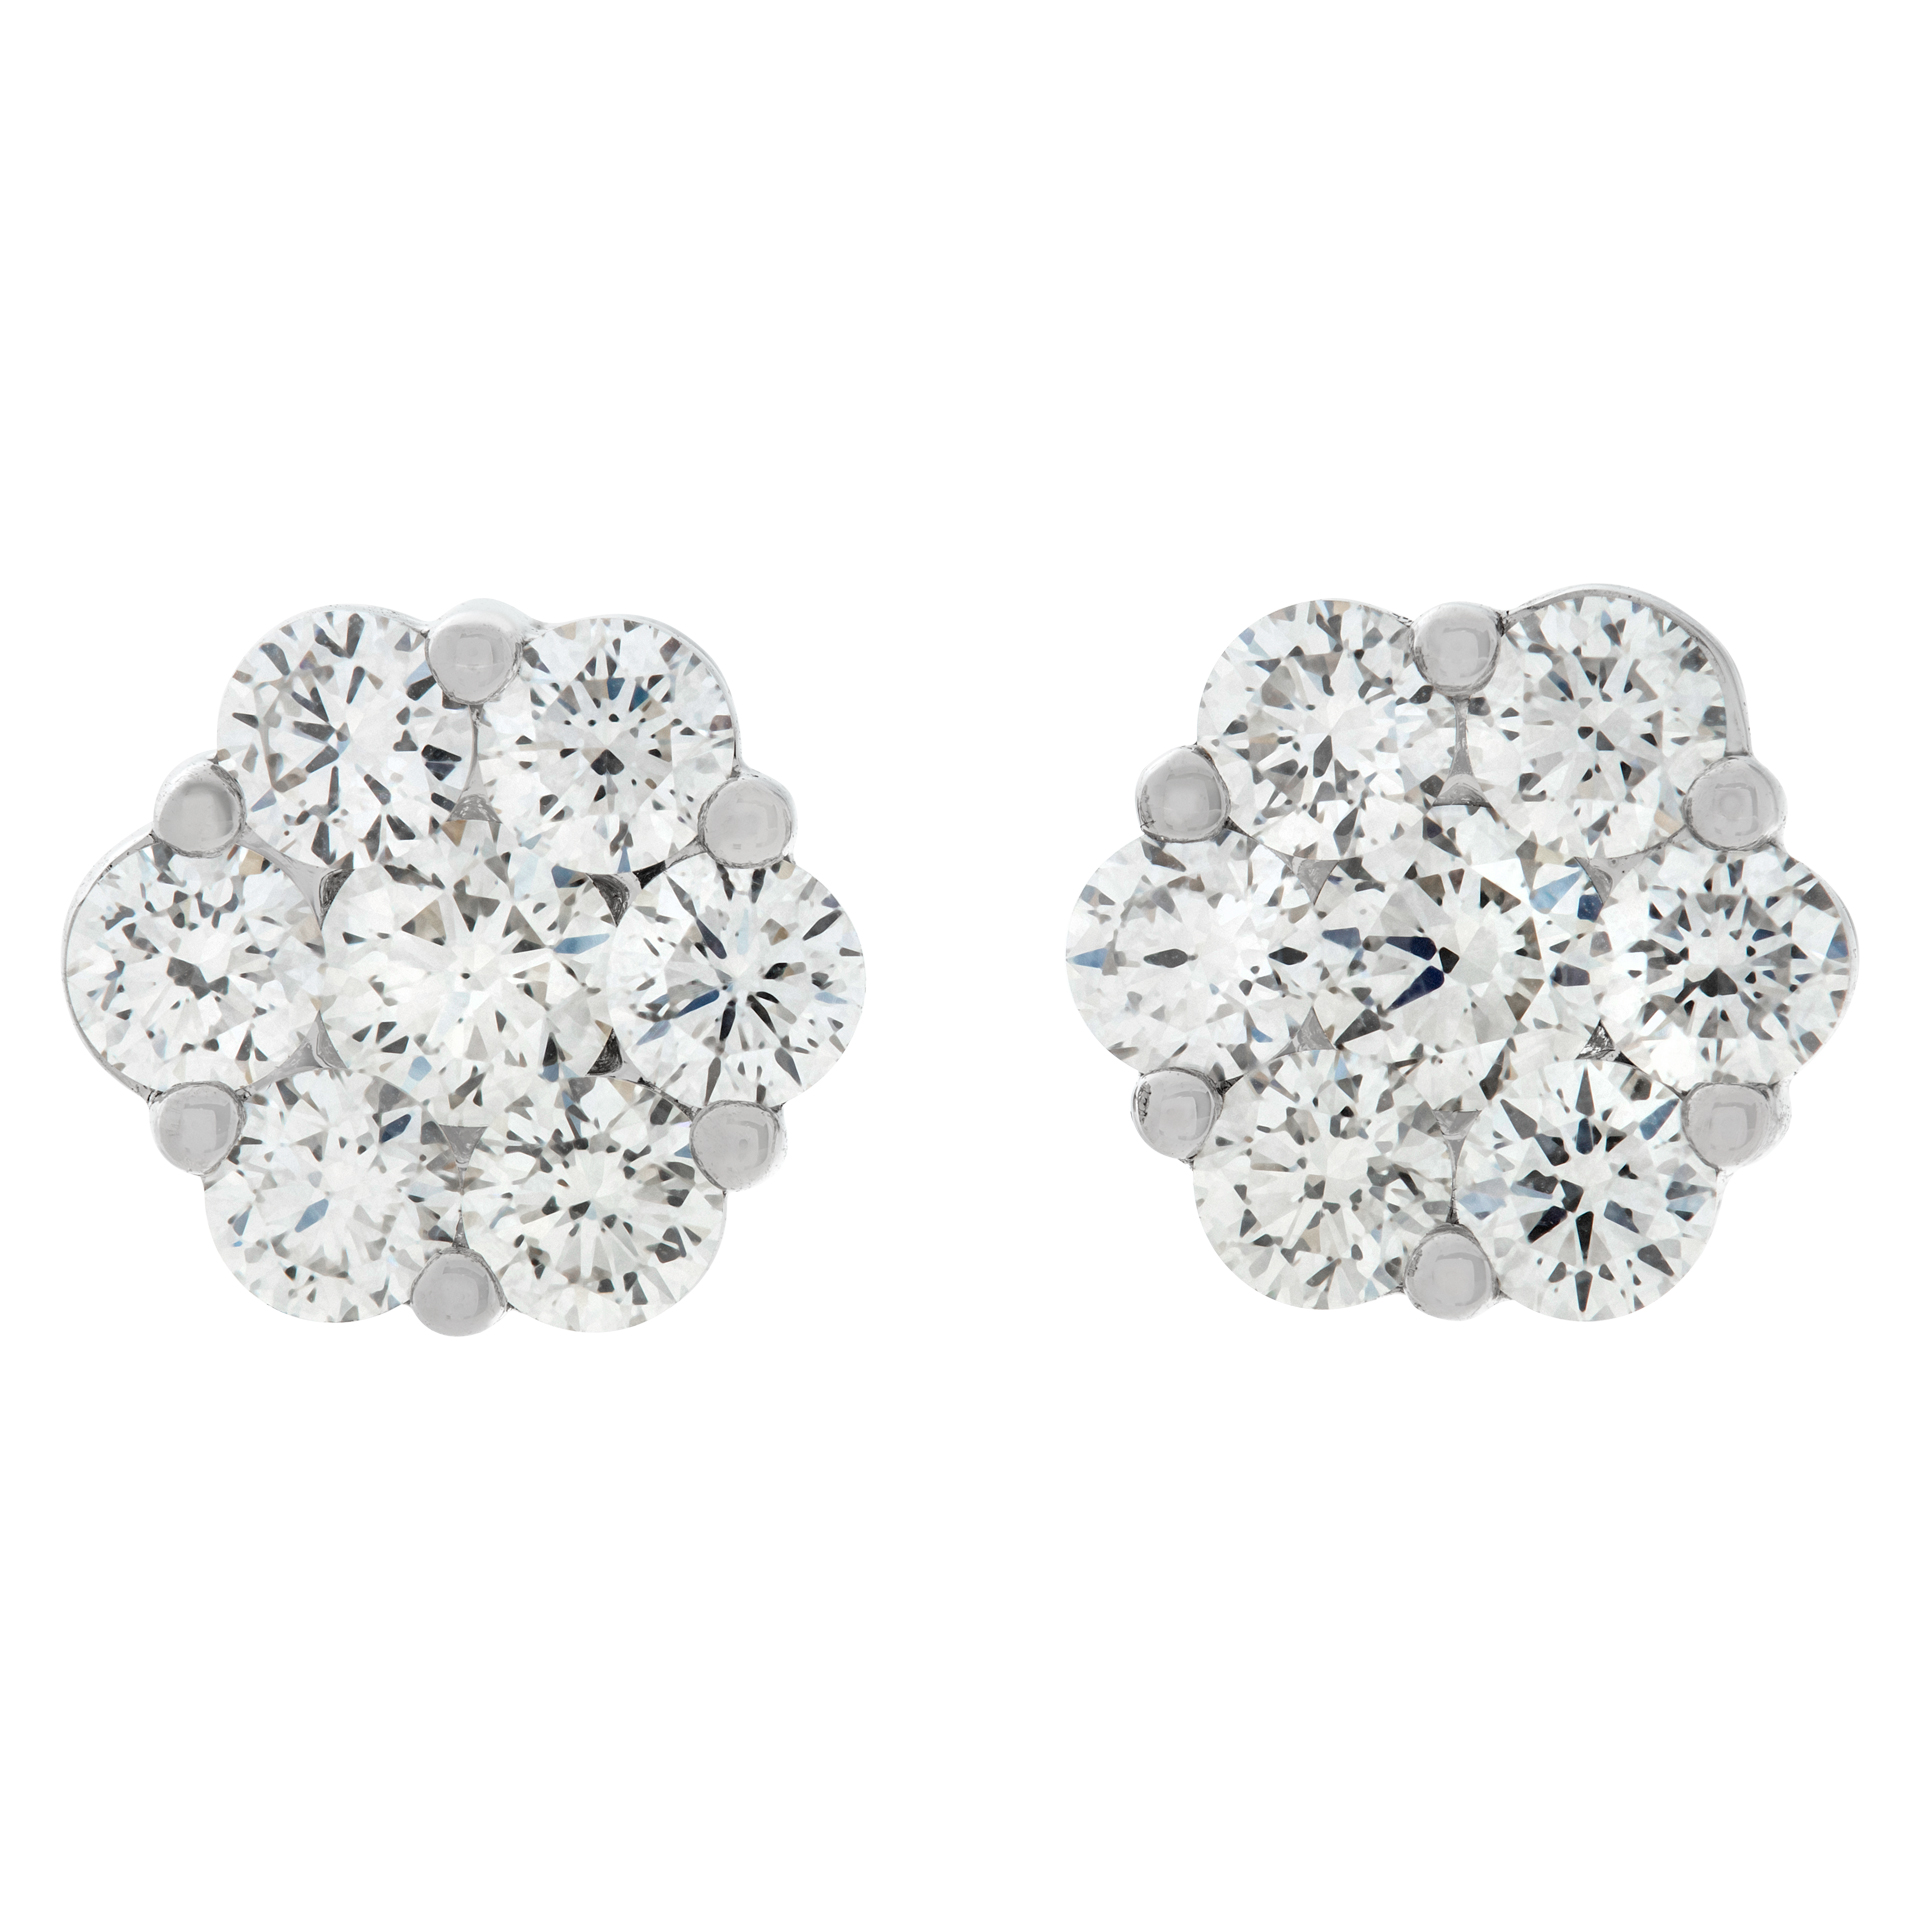 Floral shaped round diamond cluster earrings in 18k white gold w/ 2.49 carats image 1